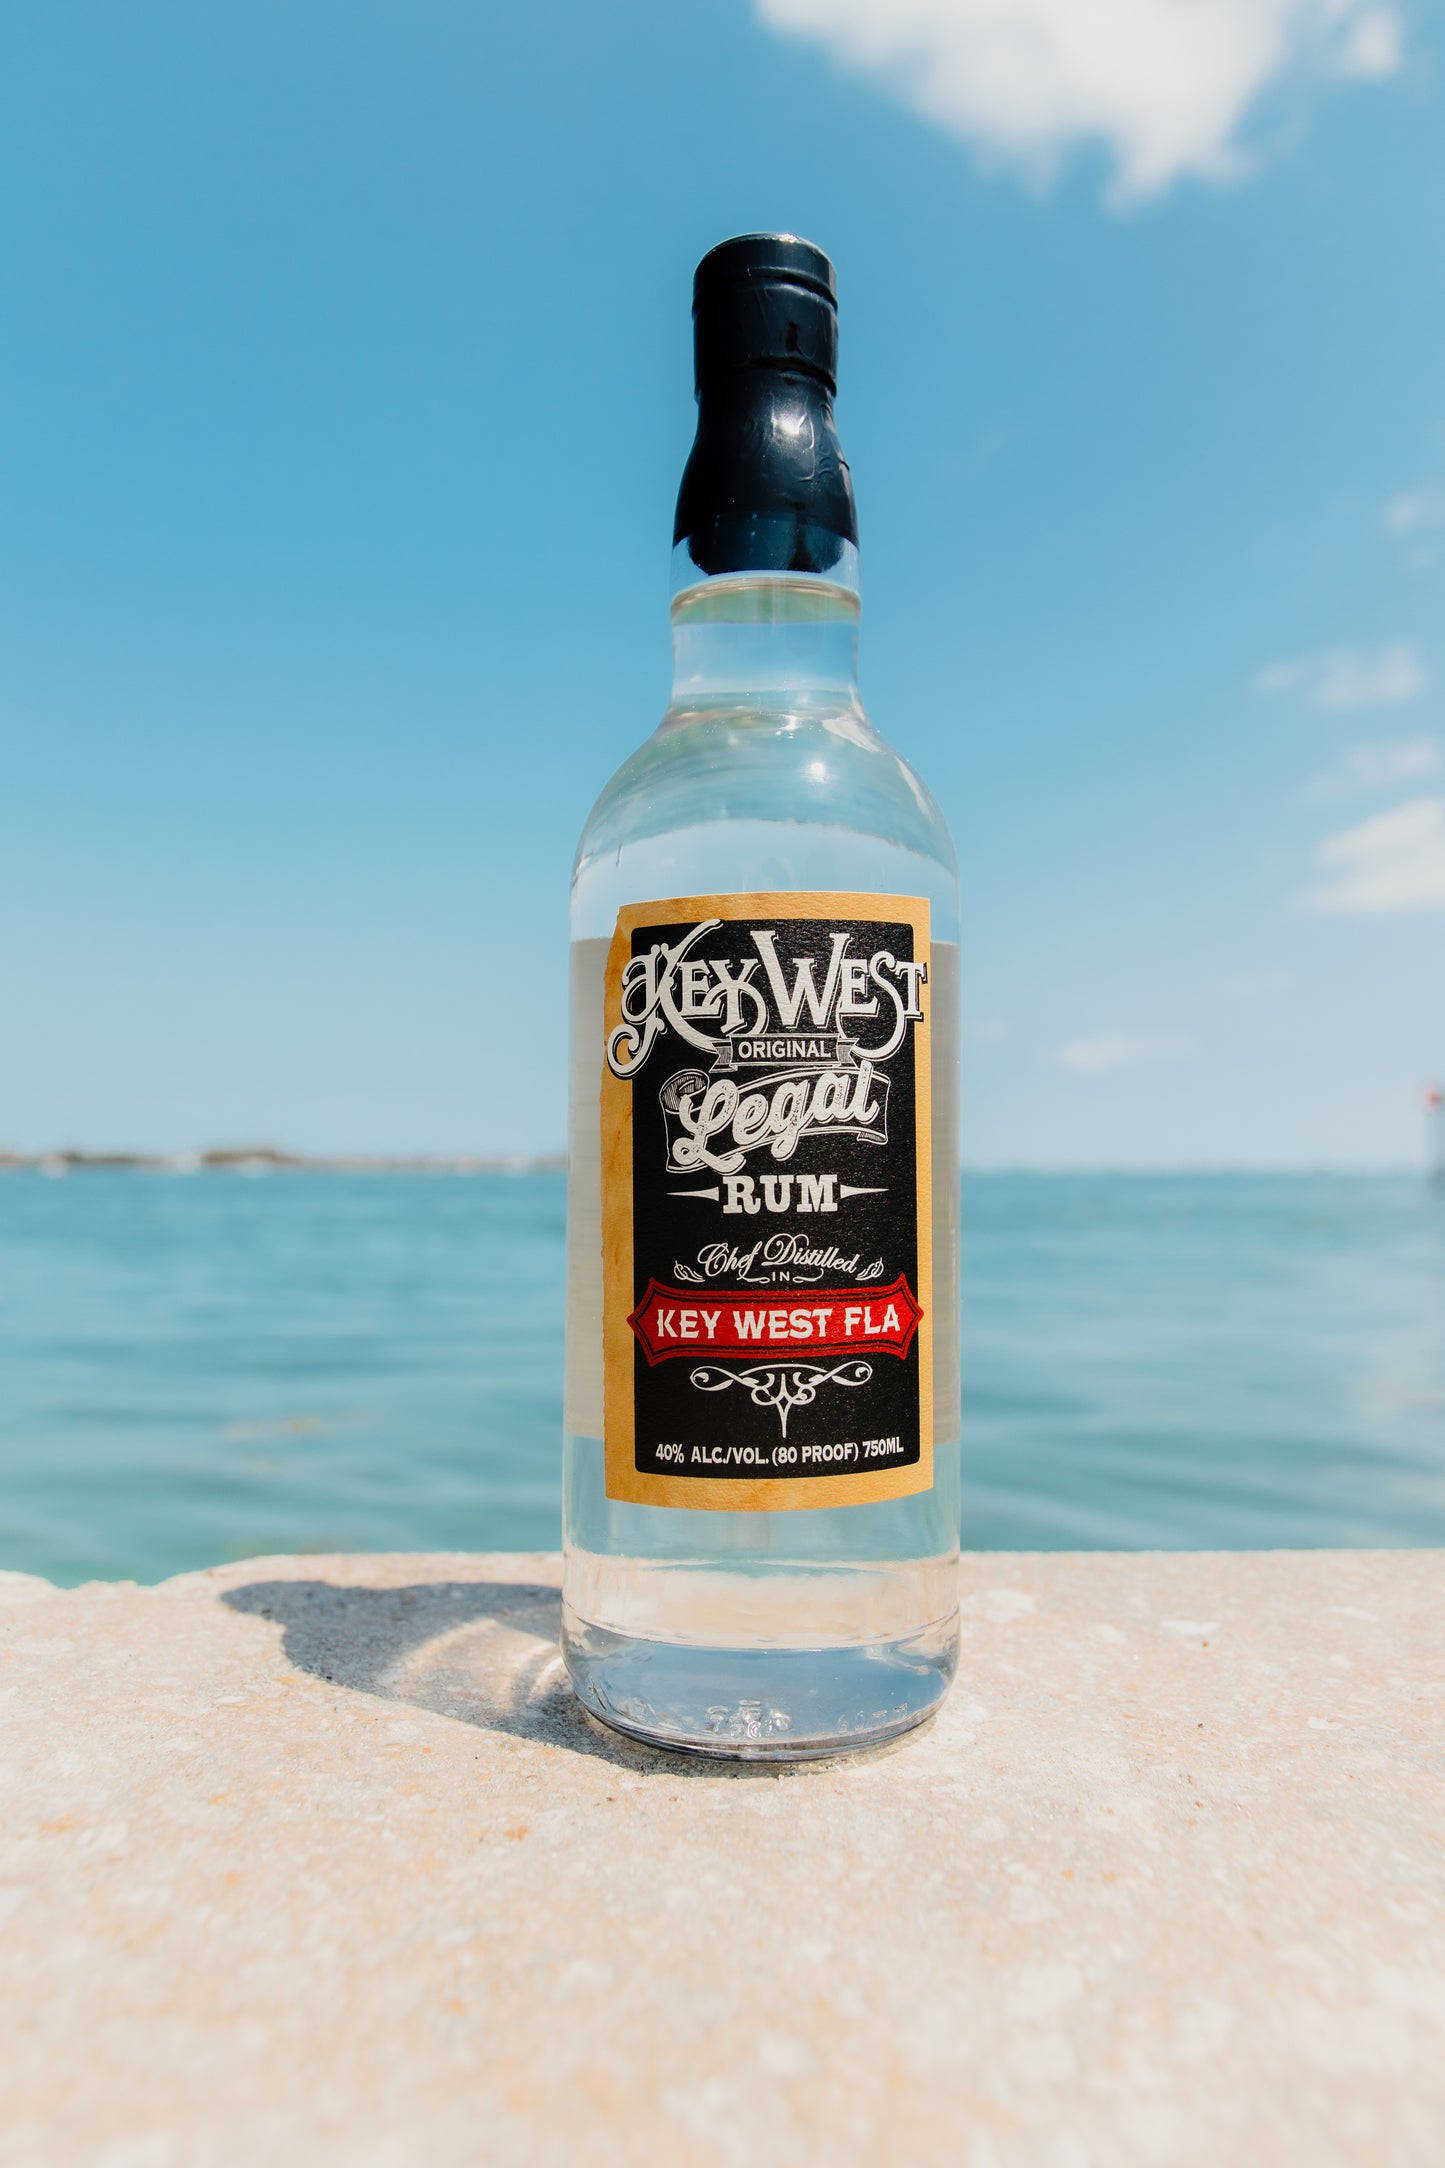 Key West First Legal Rum - Double Gold winner